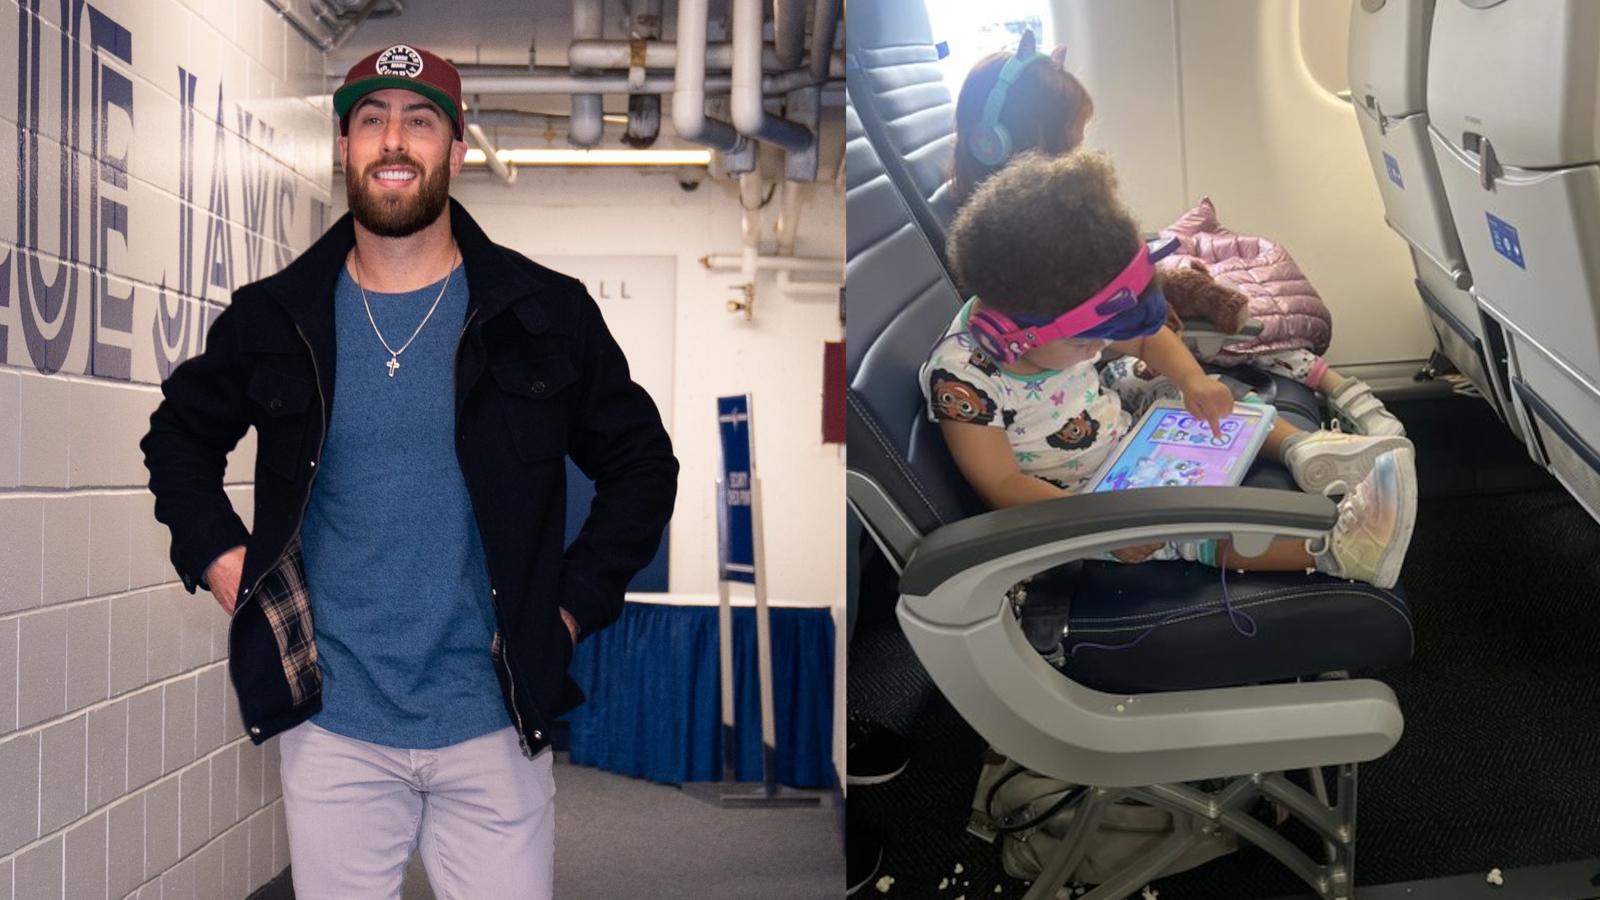 Anthony Bass (left), his daughters on an airplane (right)